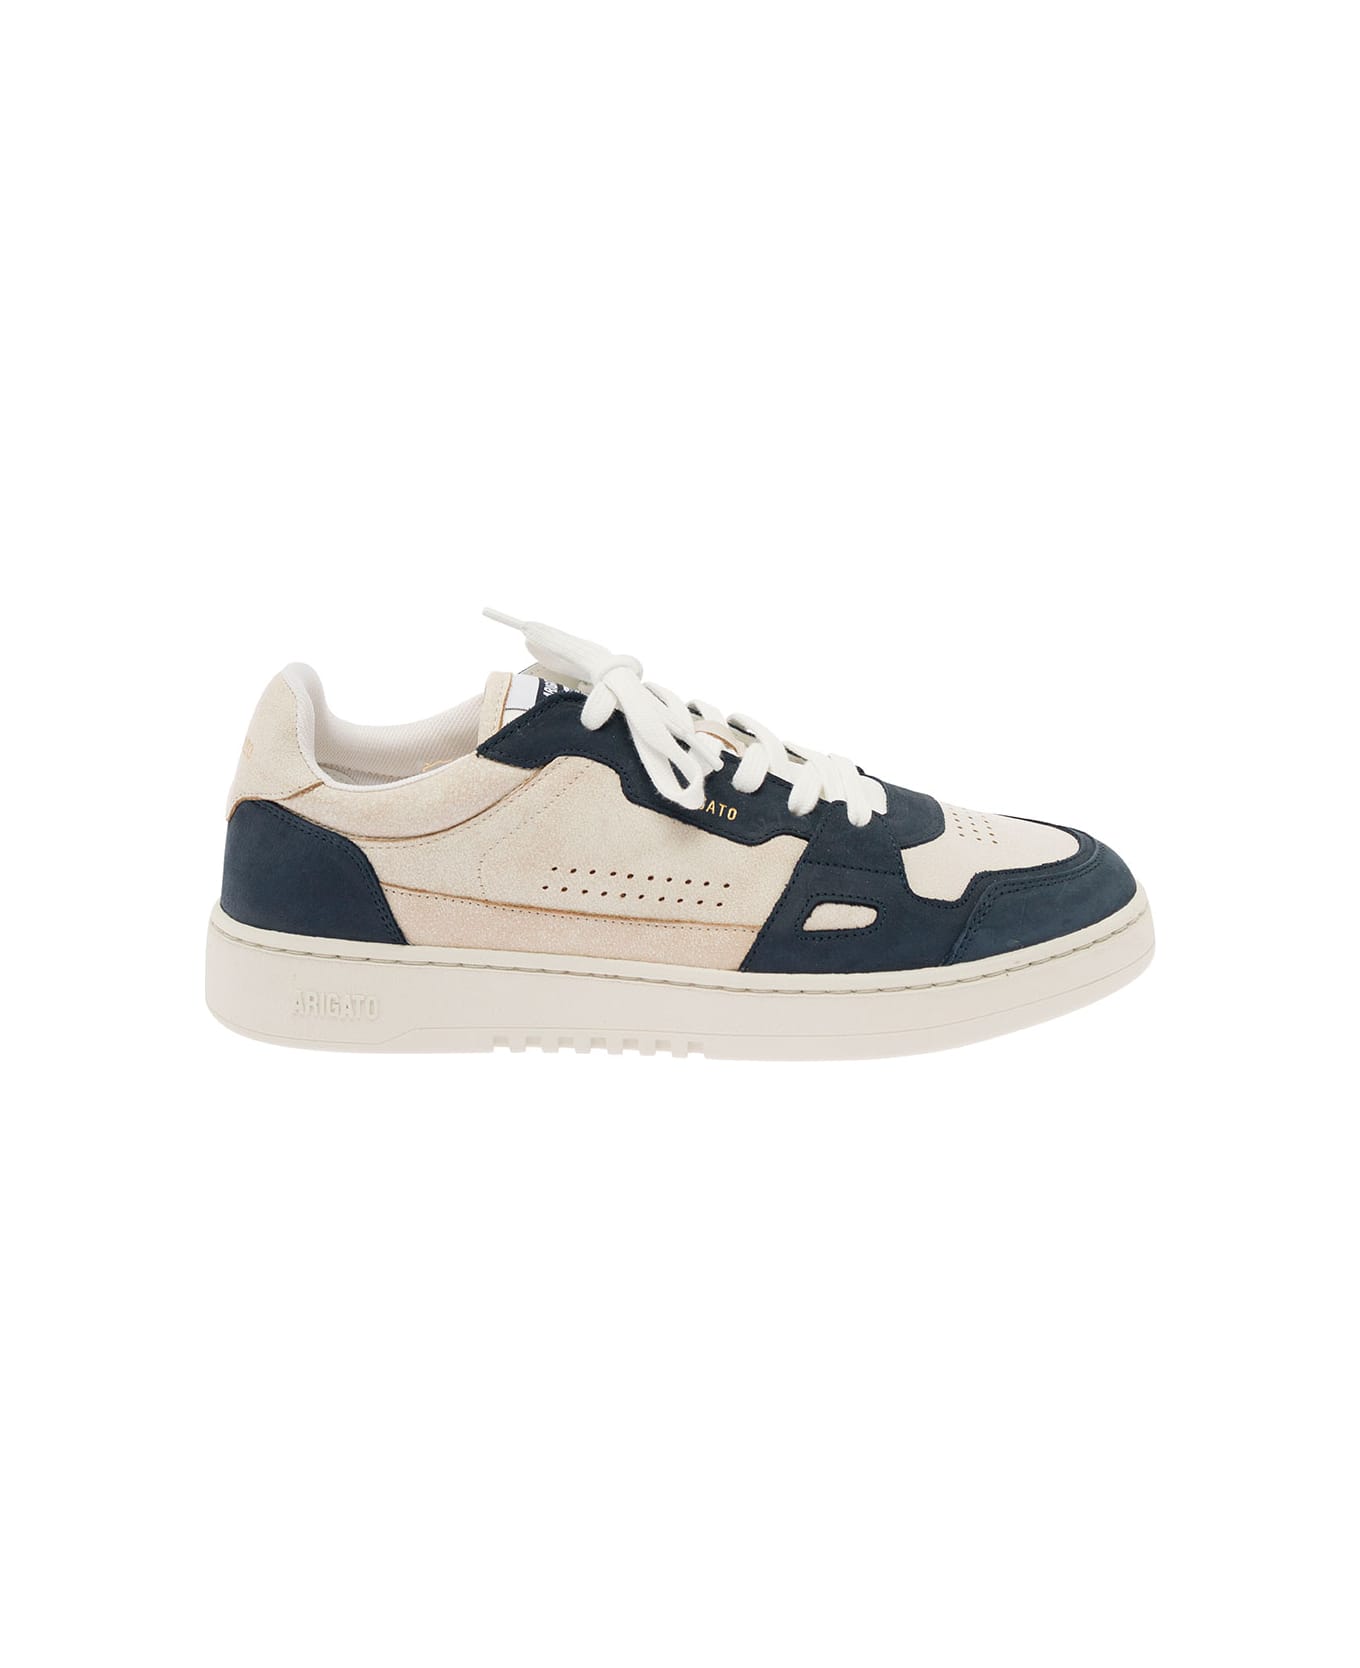 Axel Arigato 'dice Lo' Blue And White Two-tone Sneakers In Calf Leather Man - White スニーカー